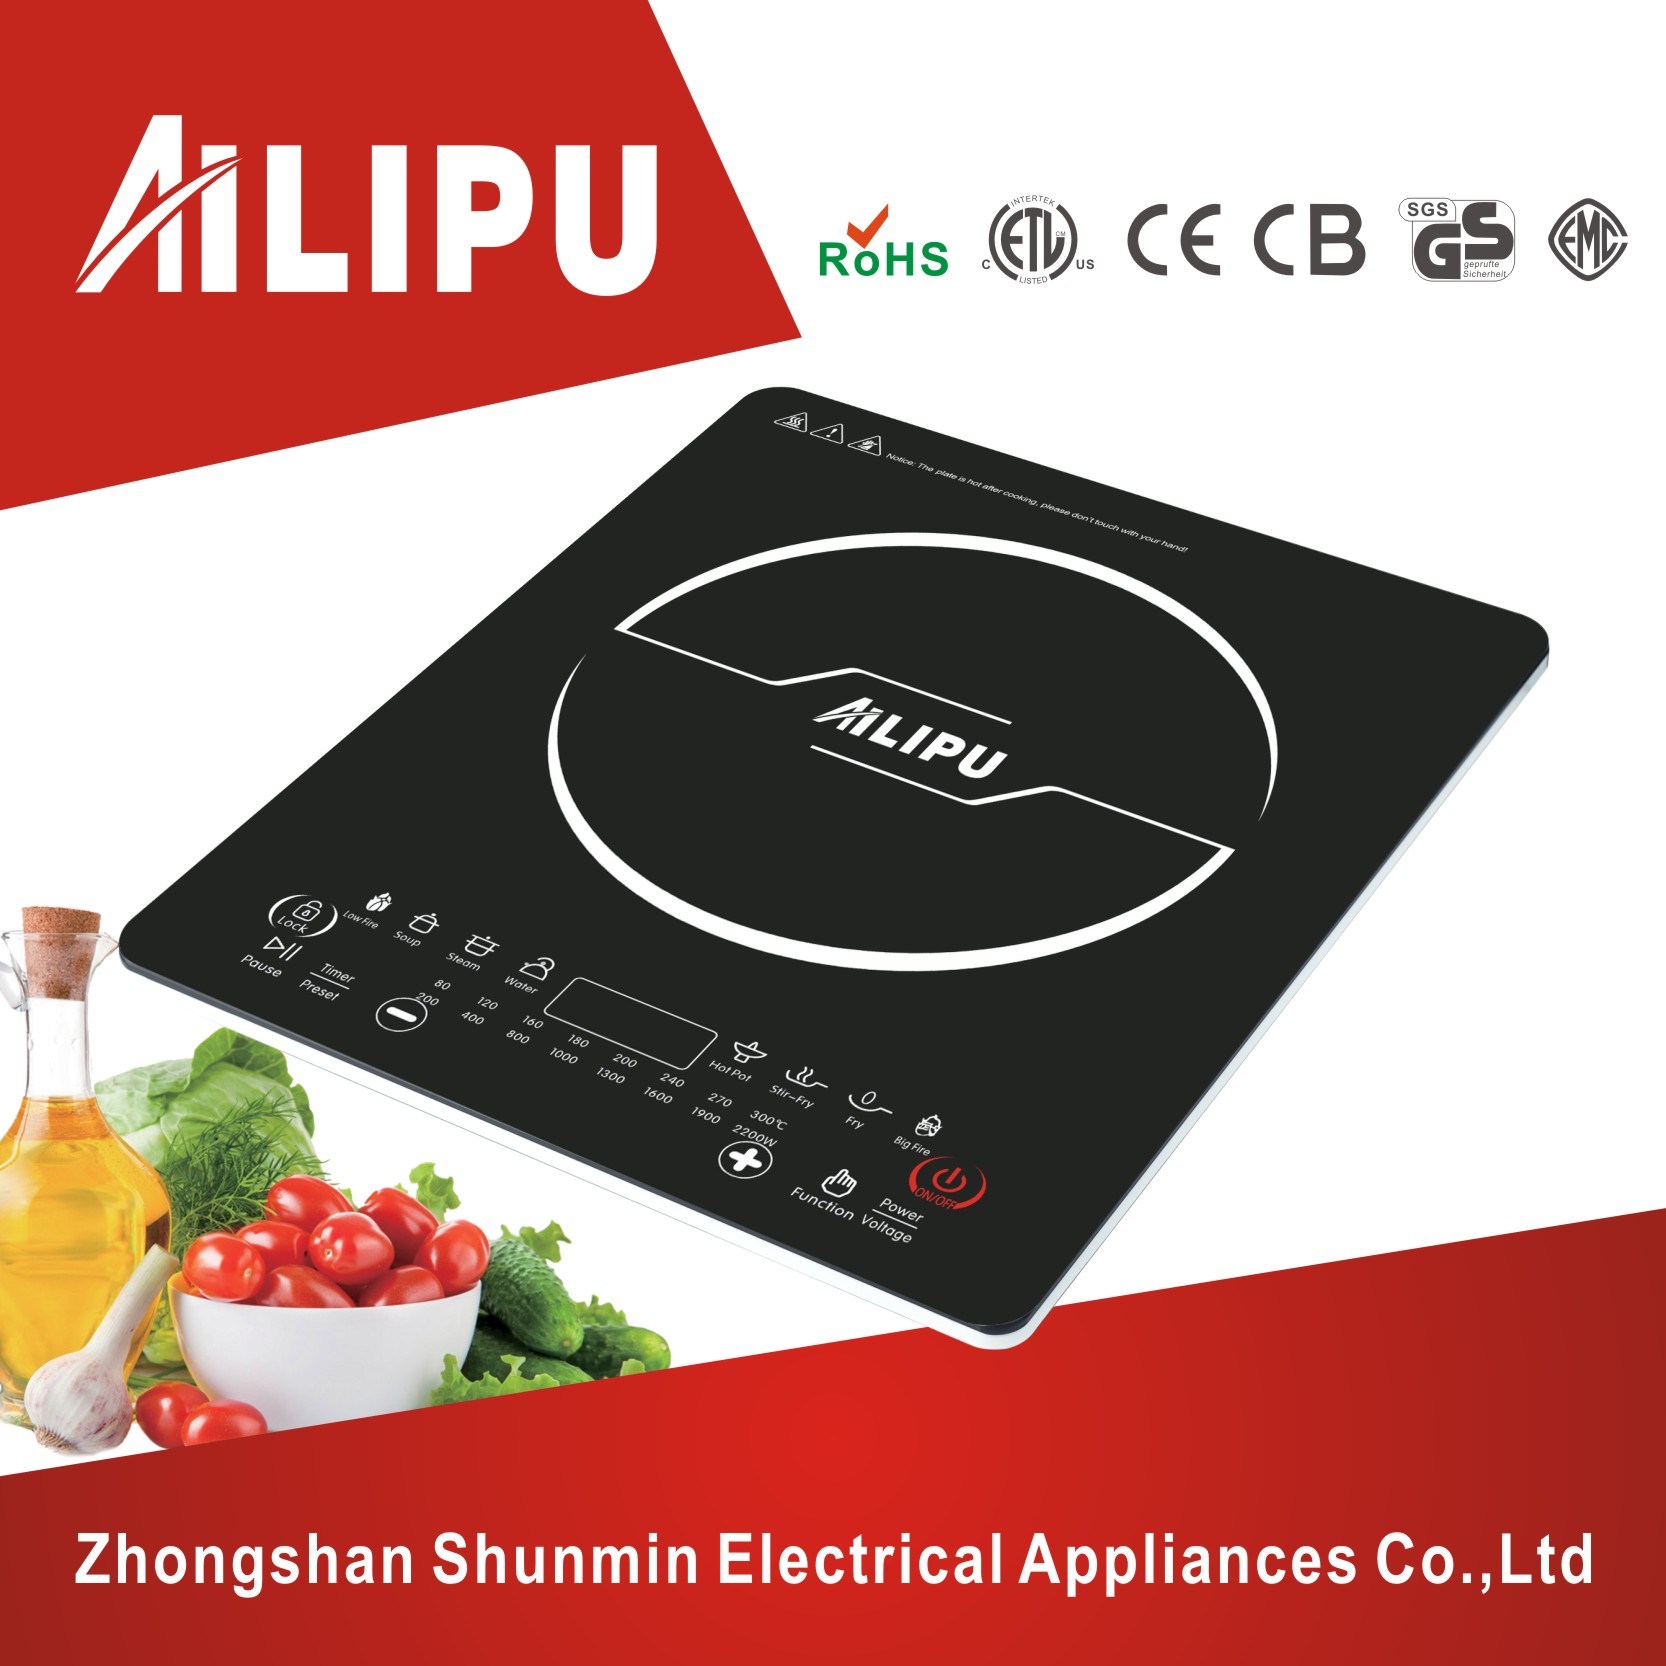 Sliding Touch Hotpot Induction Cooker/Super Thin Induction Oven/Electric Stove